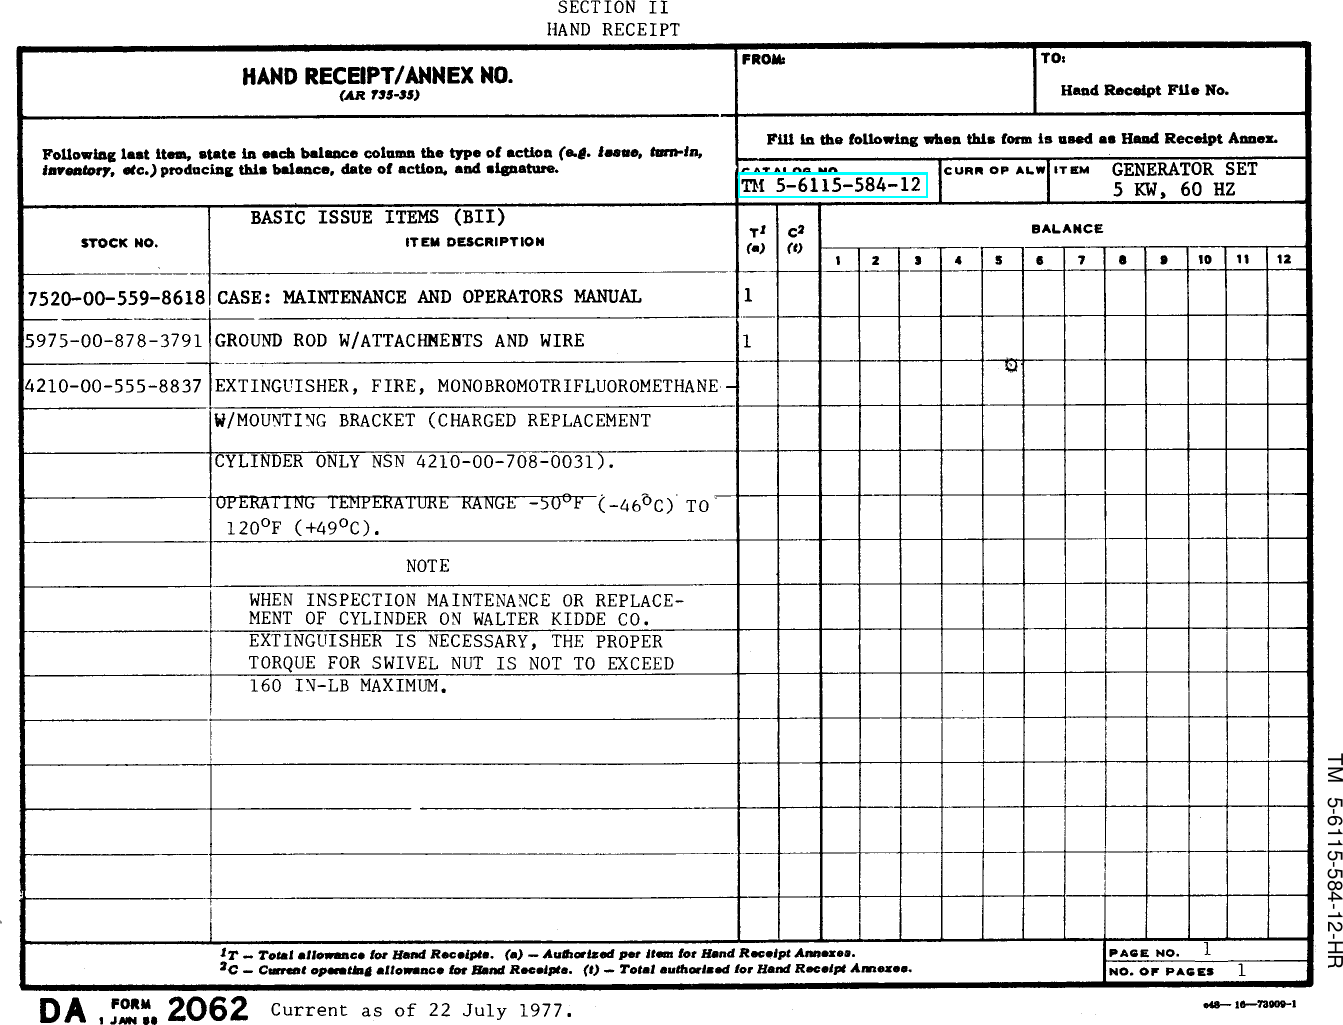 Page 5 of 10 - Ibl51b2.tmp Hand-receipt-manual